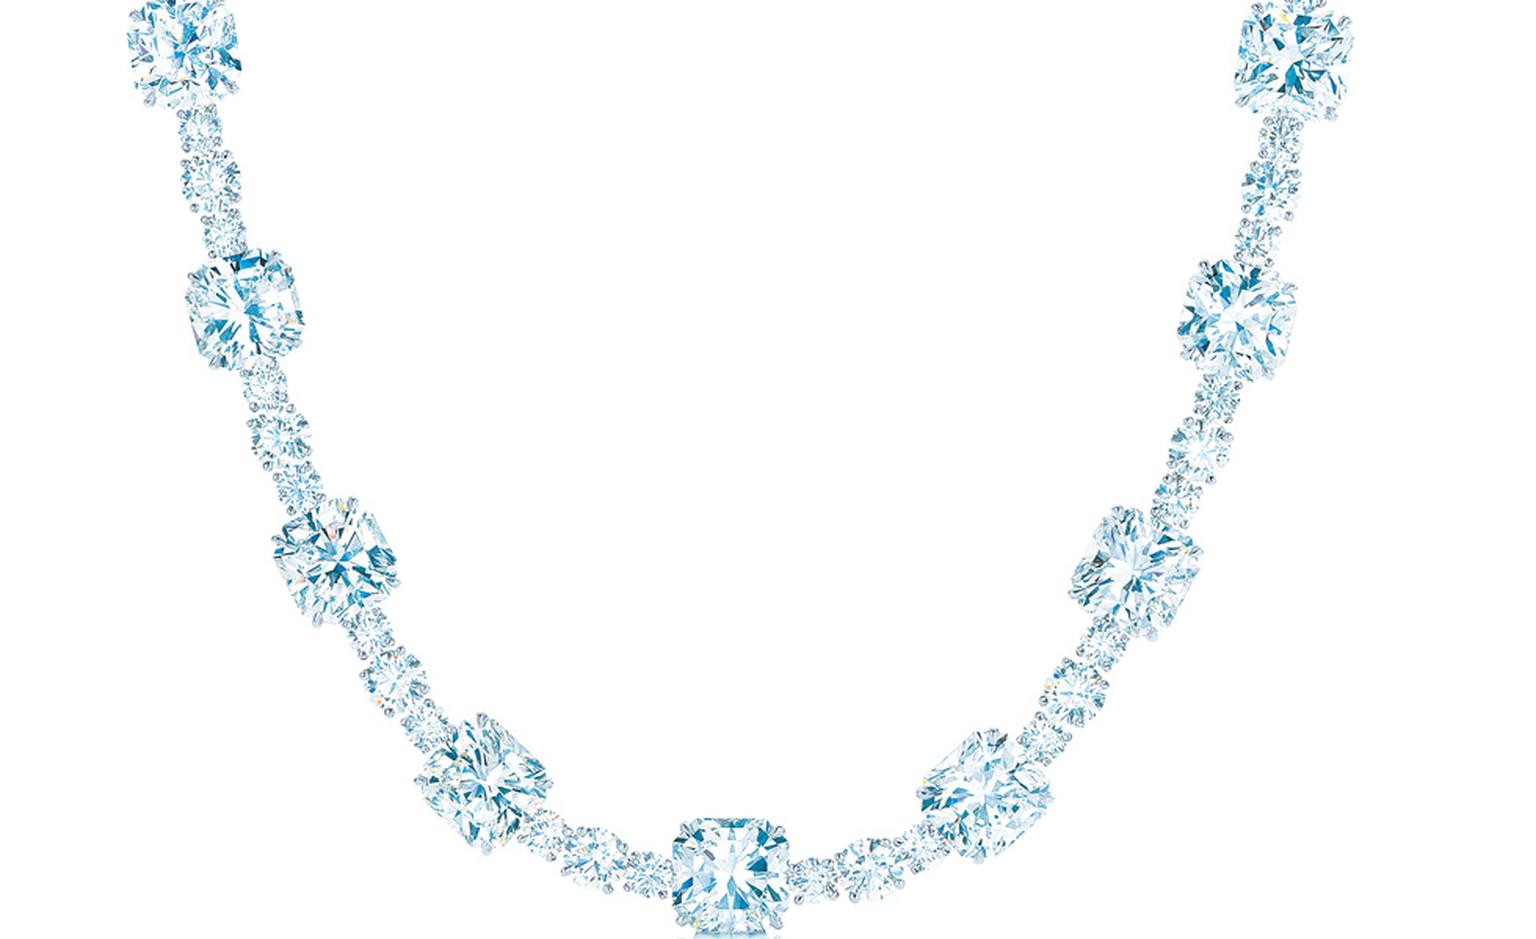 The Tiffany Lucida Star diamond necklace valued at US$ 10,000,000 as worn by Anne Hathaway at the Oscars 2011. The platinum necklace is set with 94 carats of diamonds.